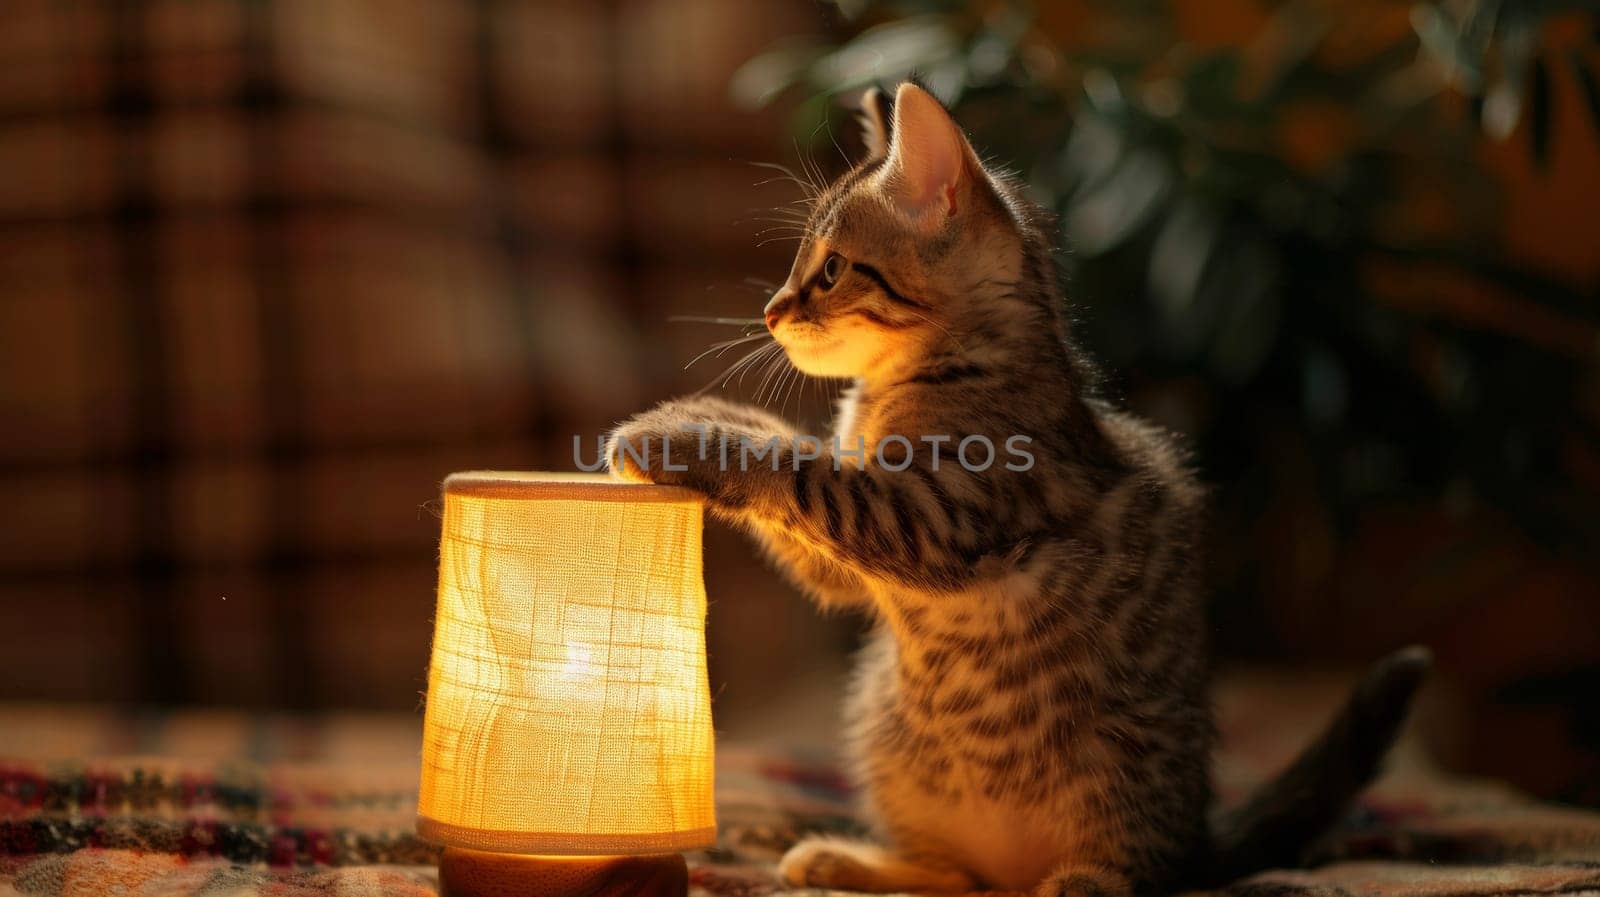 A kitten sitting on a bed with its paw up next to the lamp